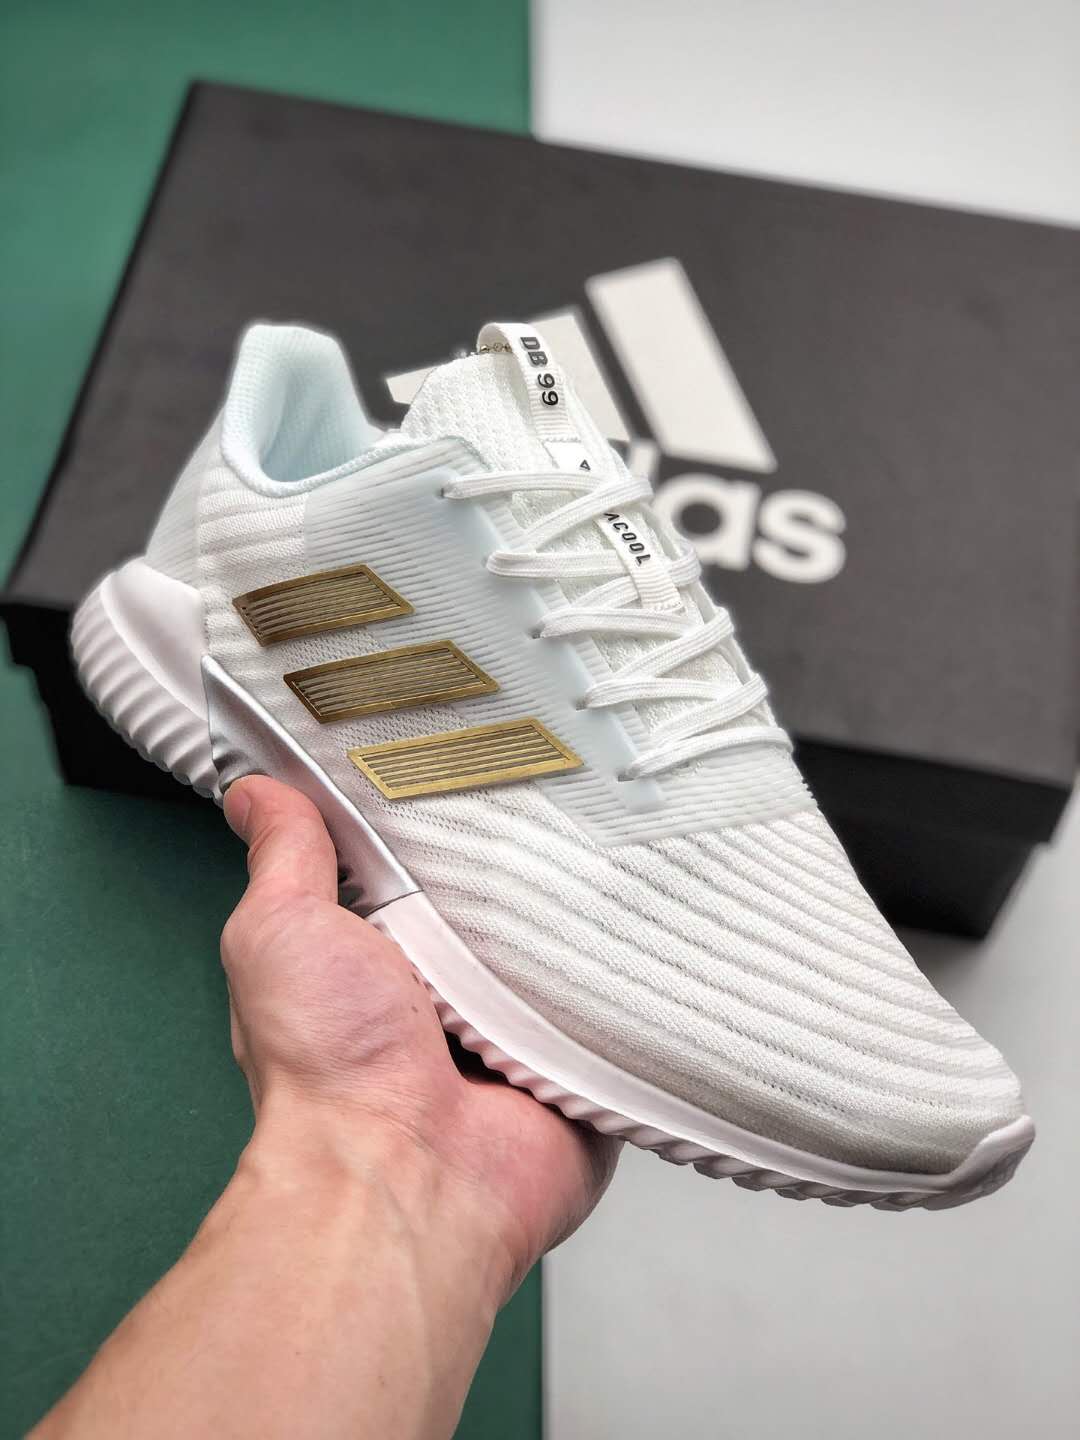 Adidas ClimaCool 2.0 White Gold B75898 - Stylish and Comfortable Footwear